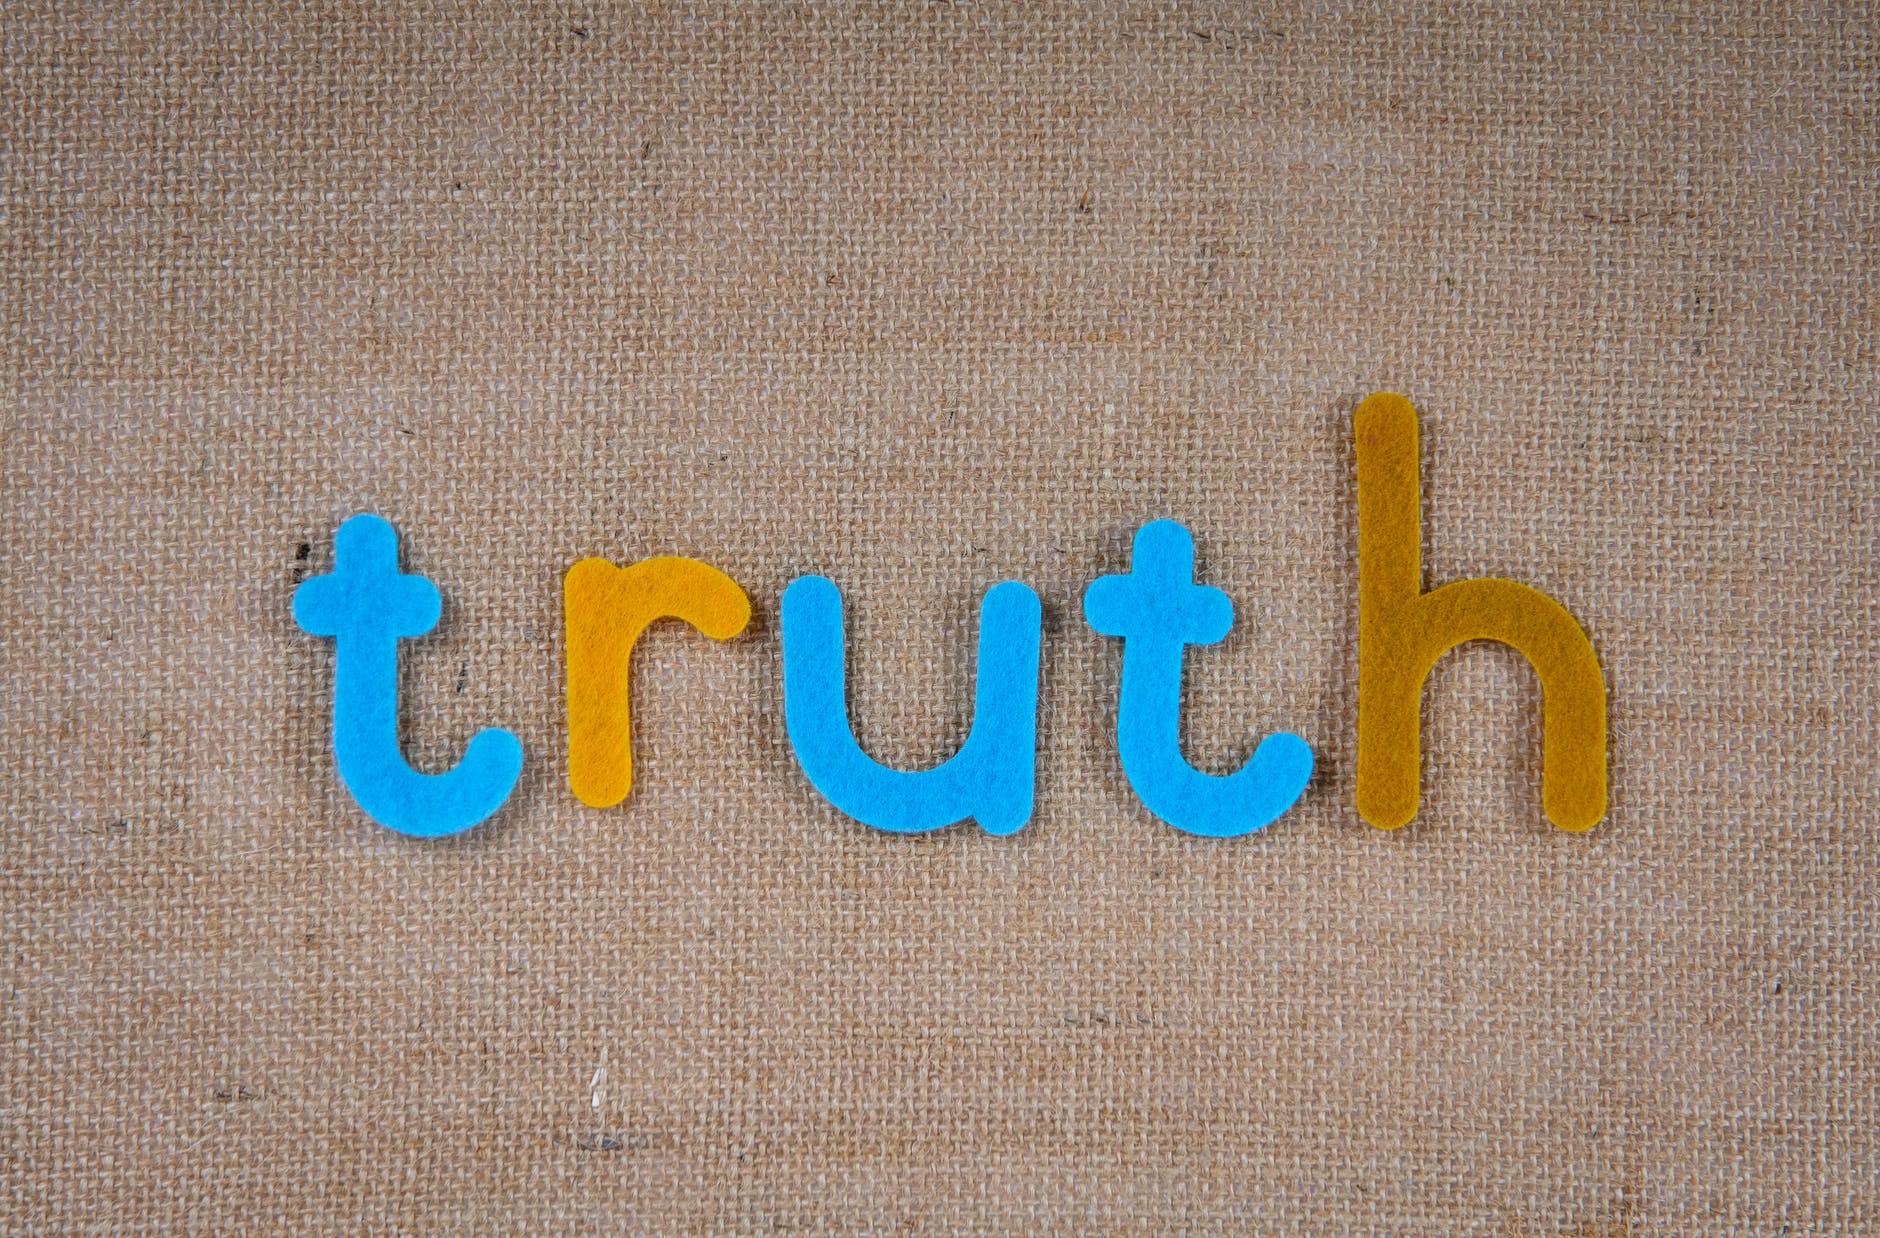 We intend Truthfulness as the Latin 'veritate'.